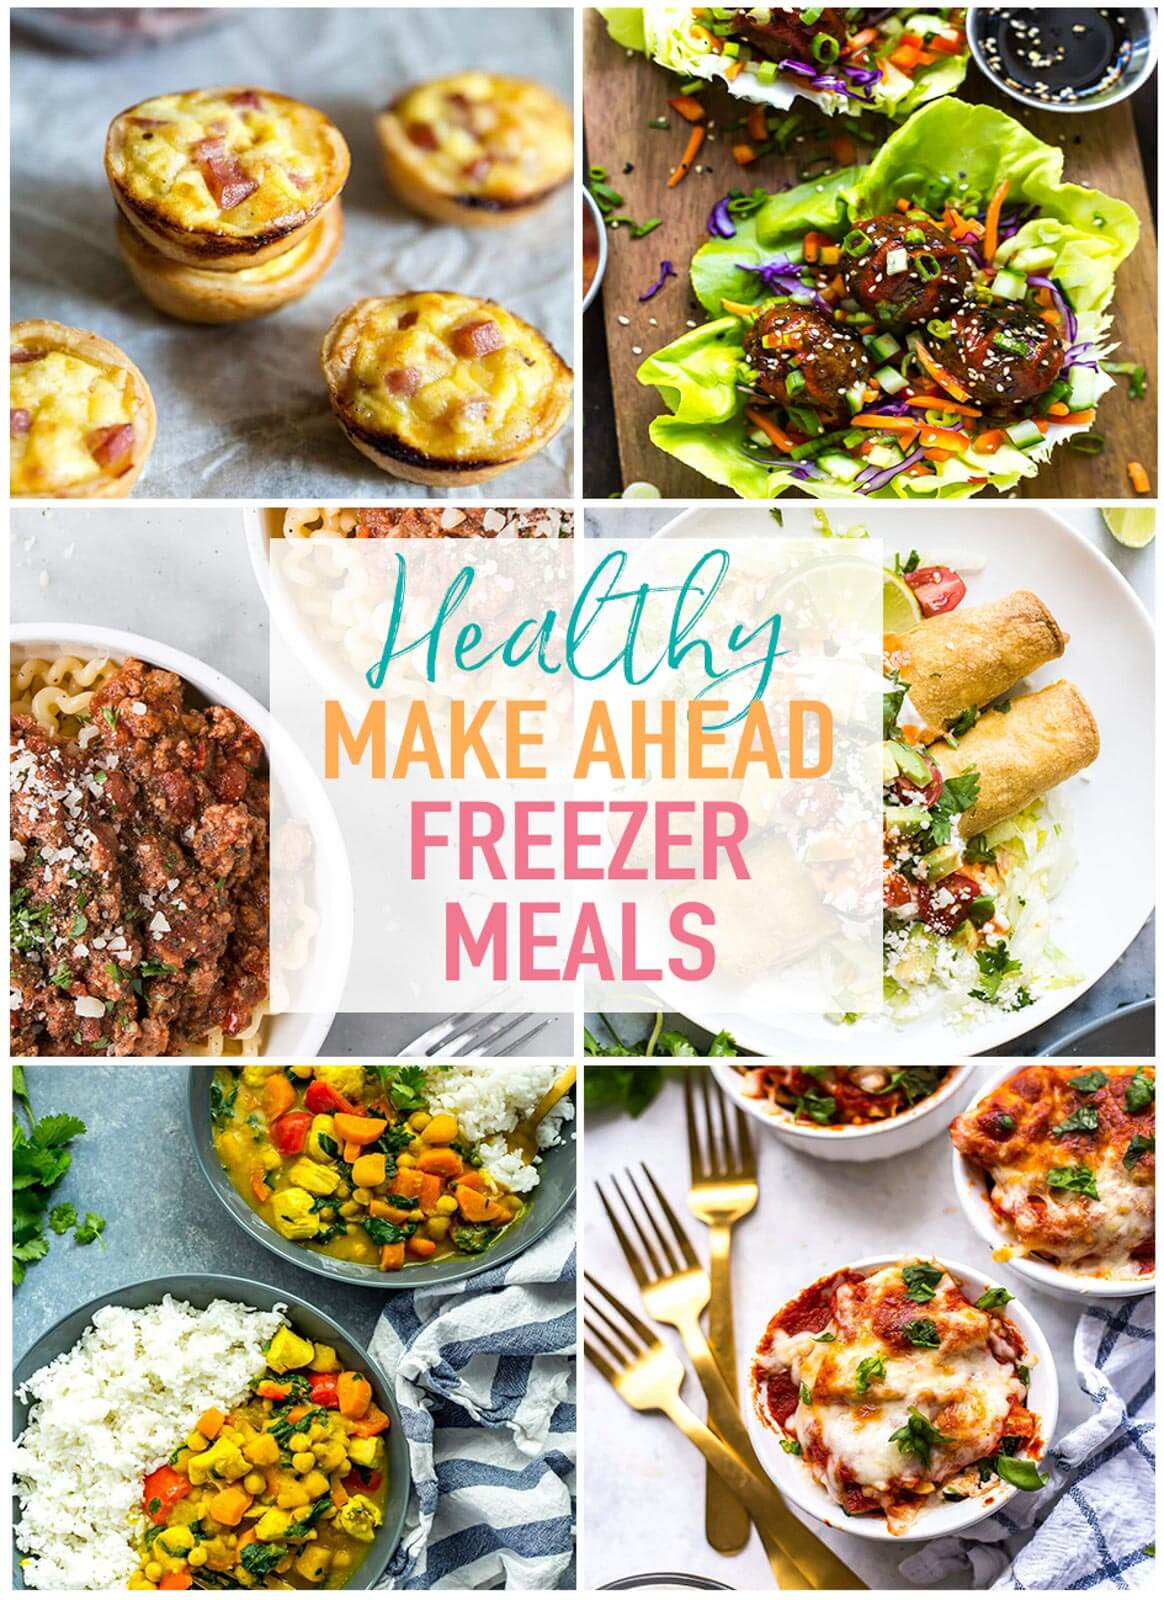 Healthy Make Ahead Dinners
 21 Healthy Make Ahead Freezer Meals for Busy Weeknights